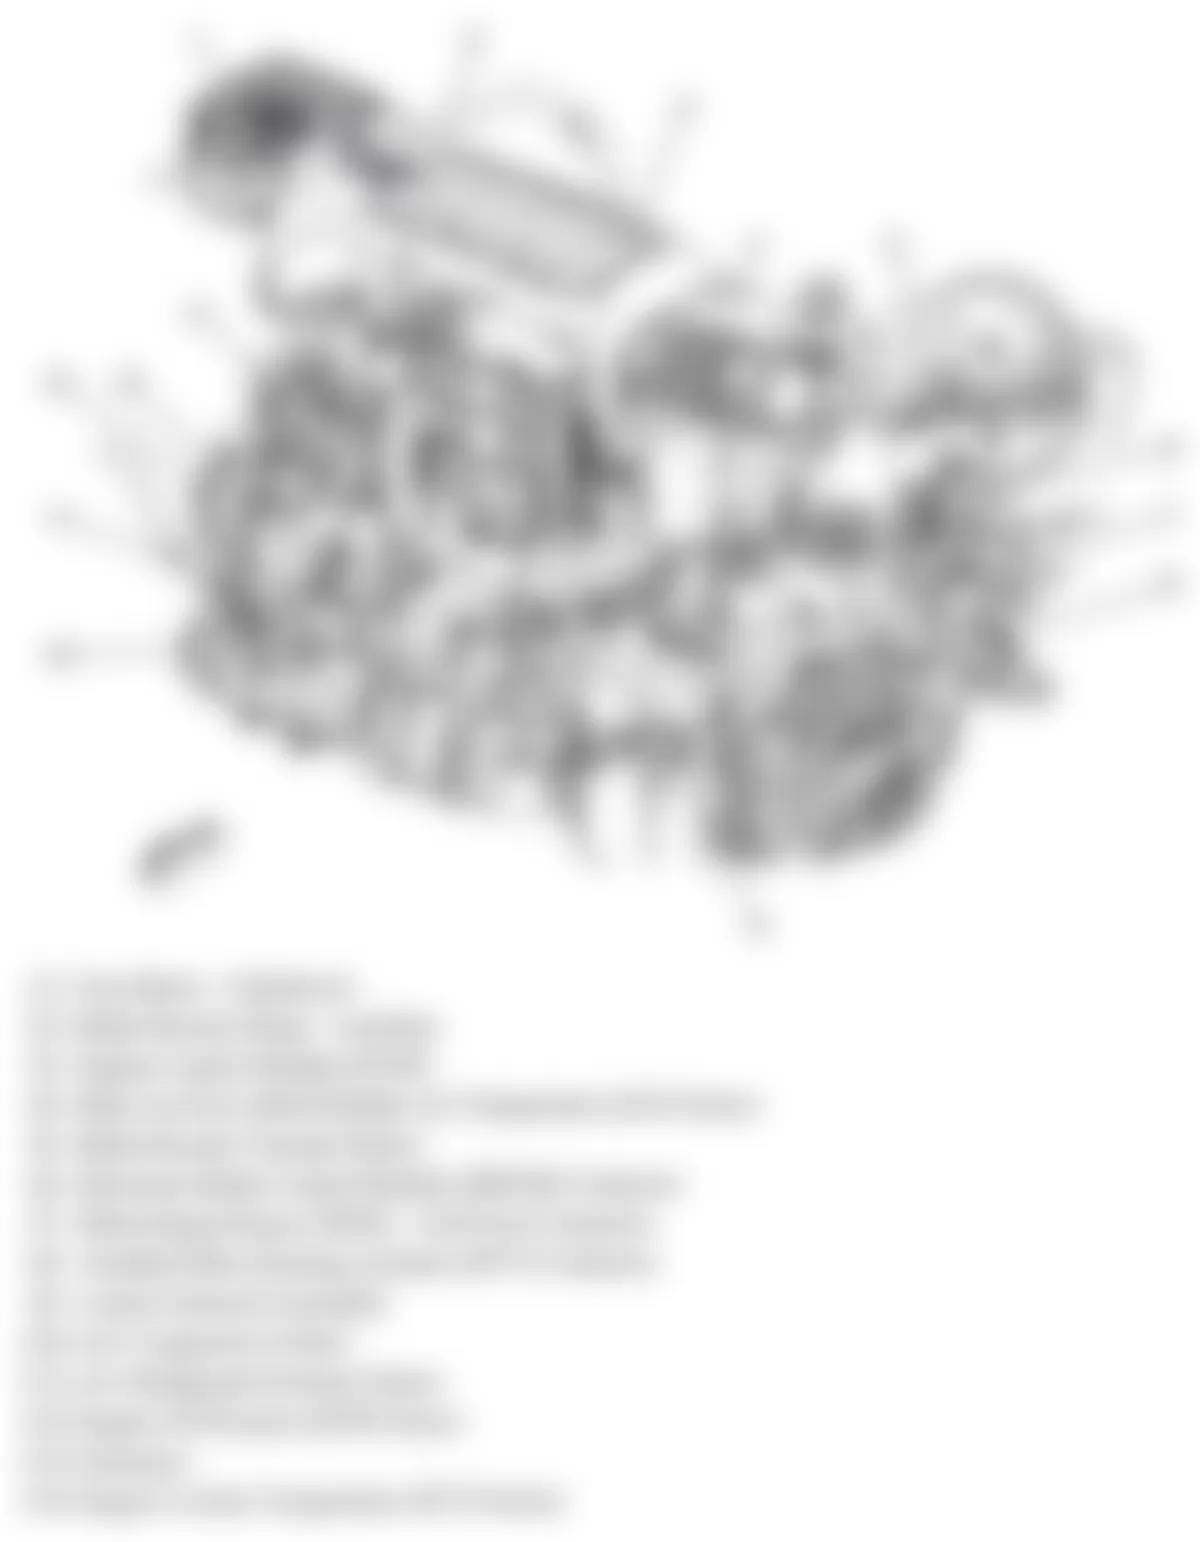 GMC Acadia SLT 2009 - Component Locations -  Left Side & Rear Of Engine